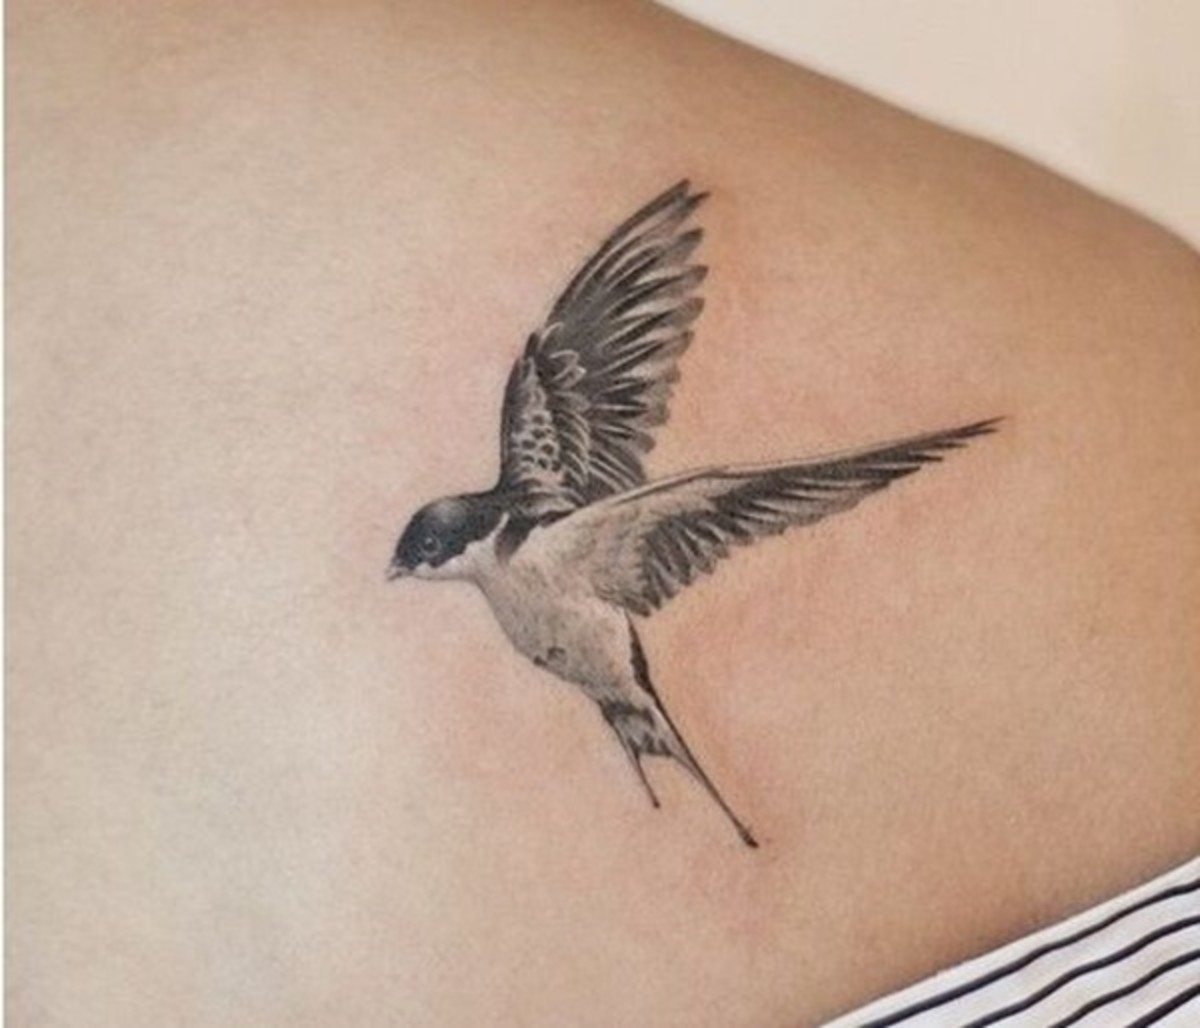 Bird Tattoos for Women + Their Special Meaning - TattooGlee | Bird tattoos  for women, Small bird tattoos, Simple bird tattoo